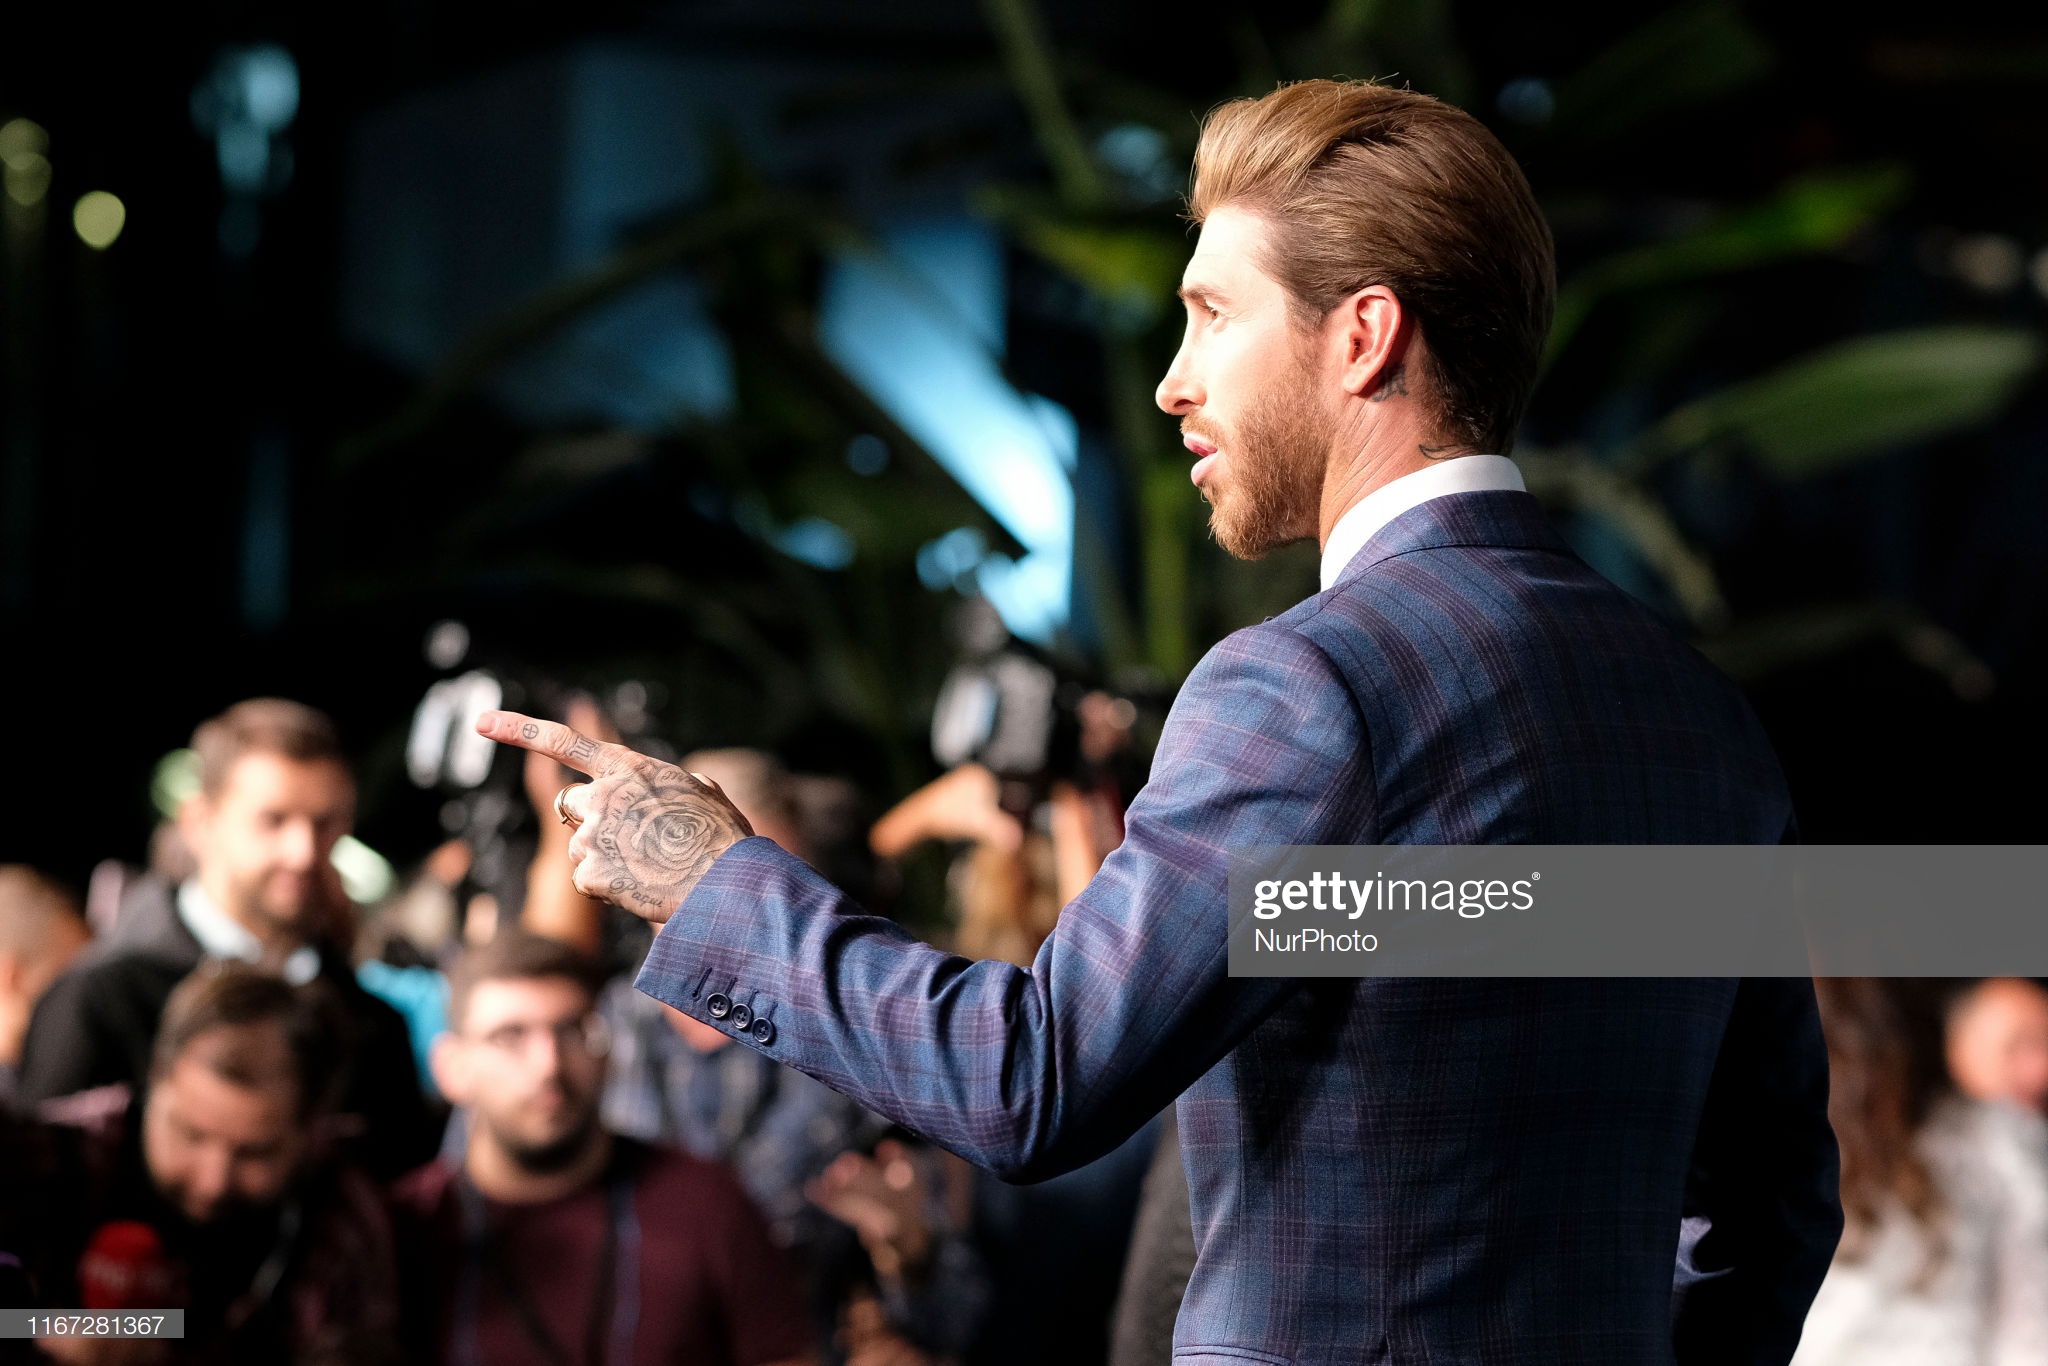 gettyimages-1167281367-2048x2048.jpg